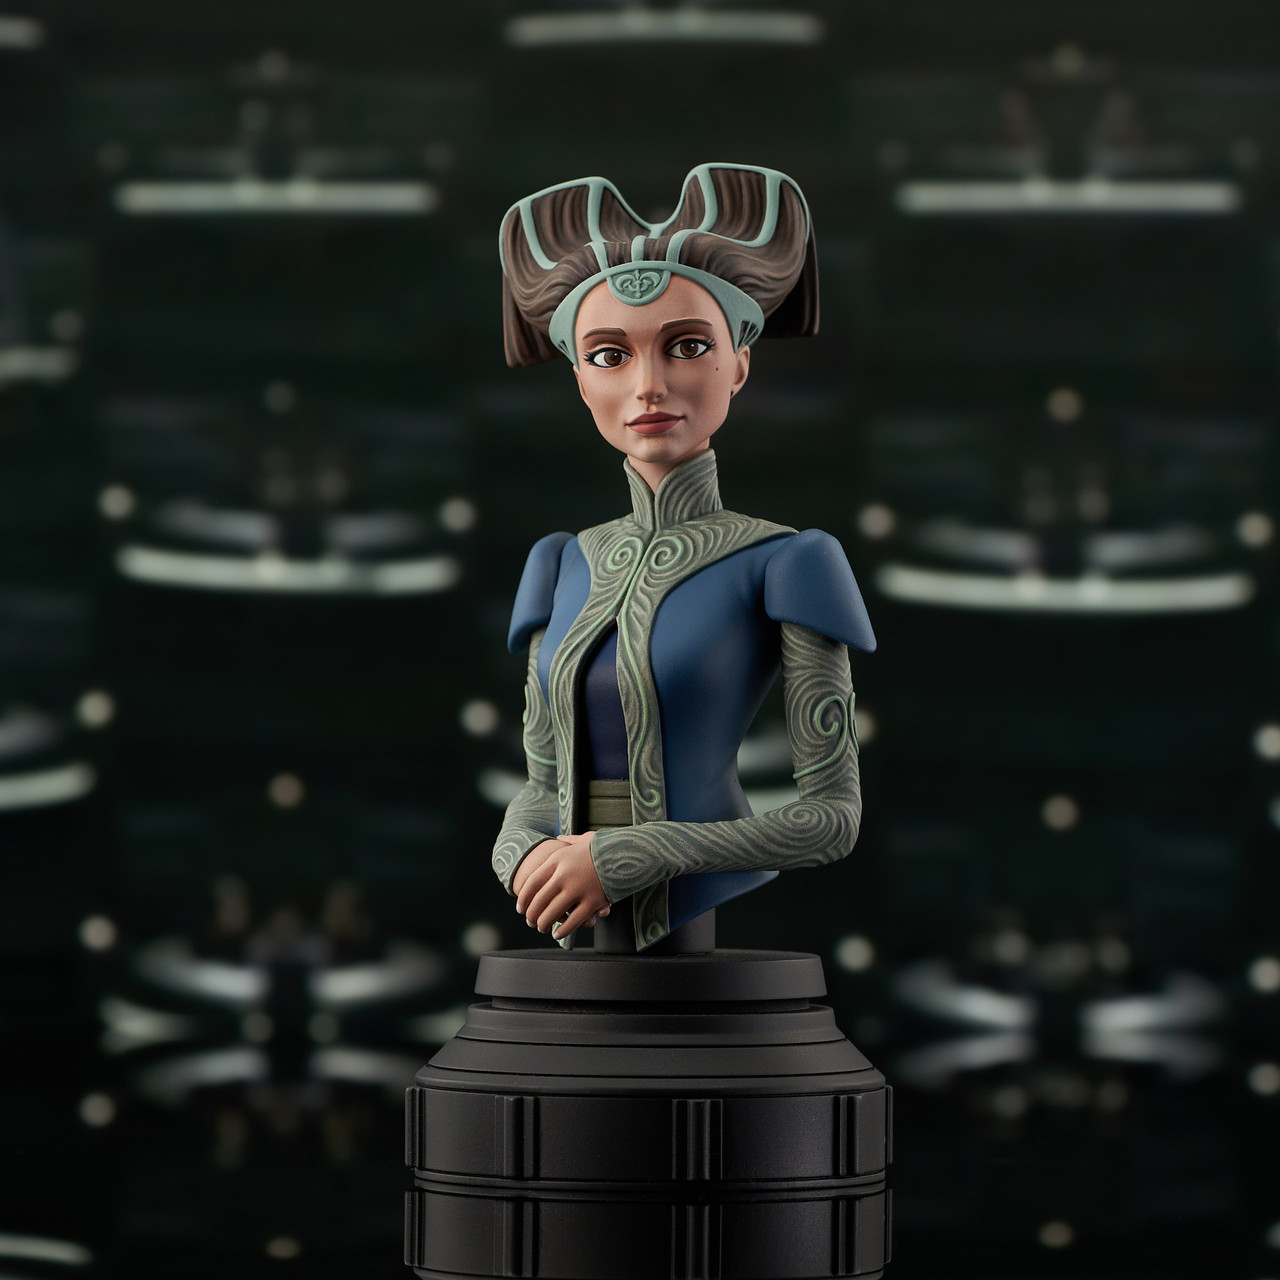 dalya ayad share images of padme from star wars photos